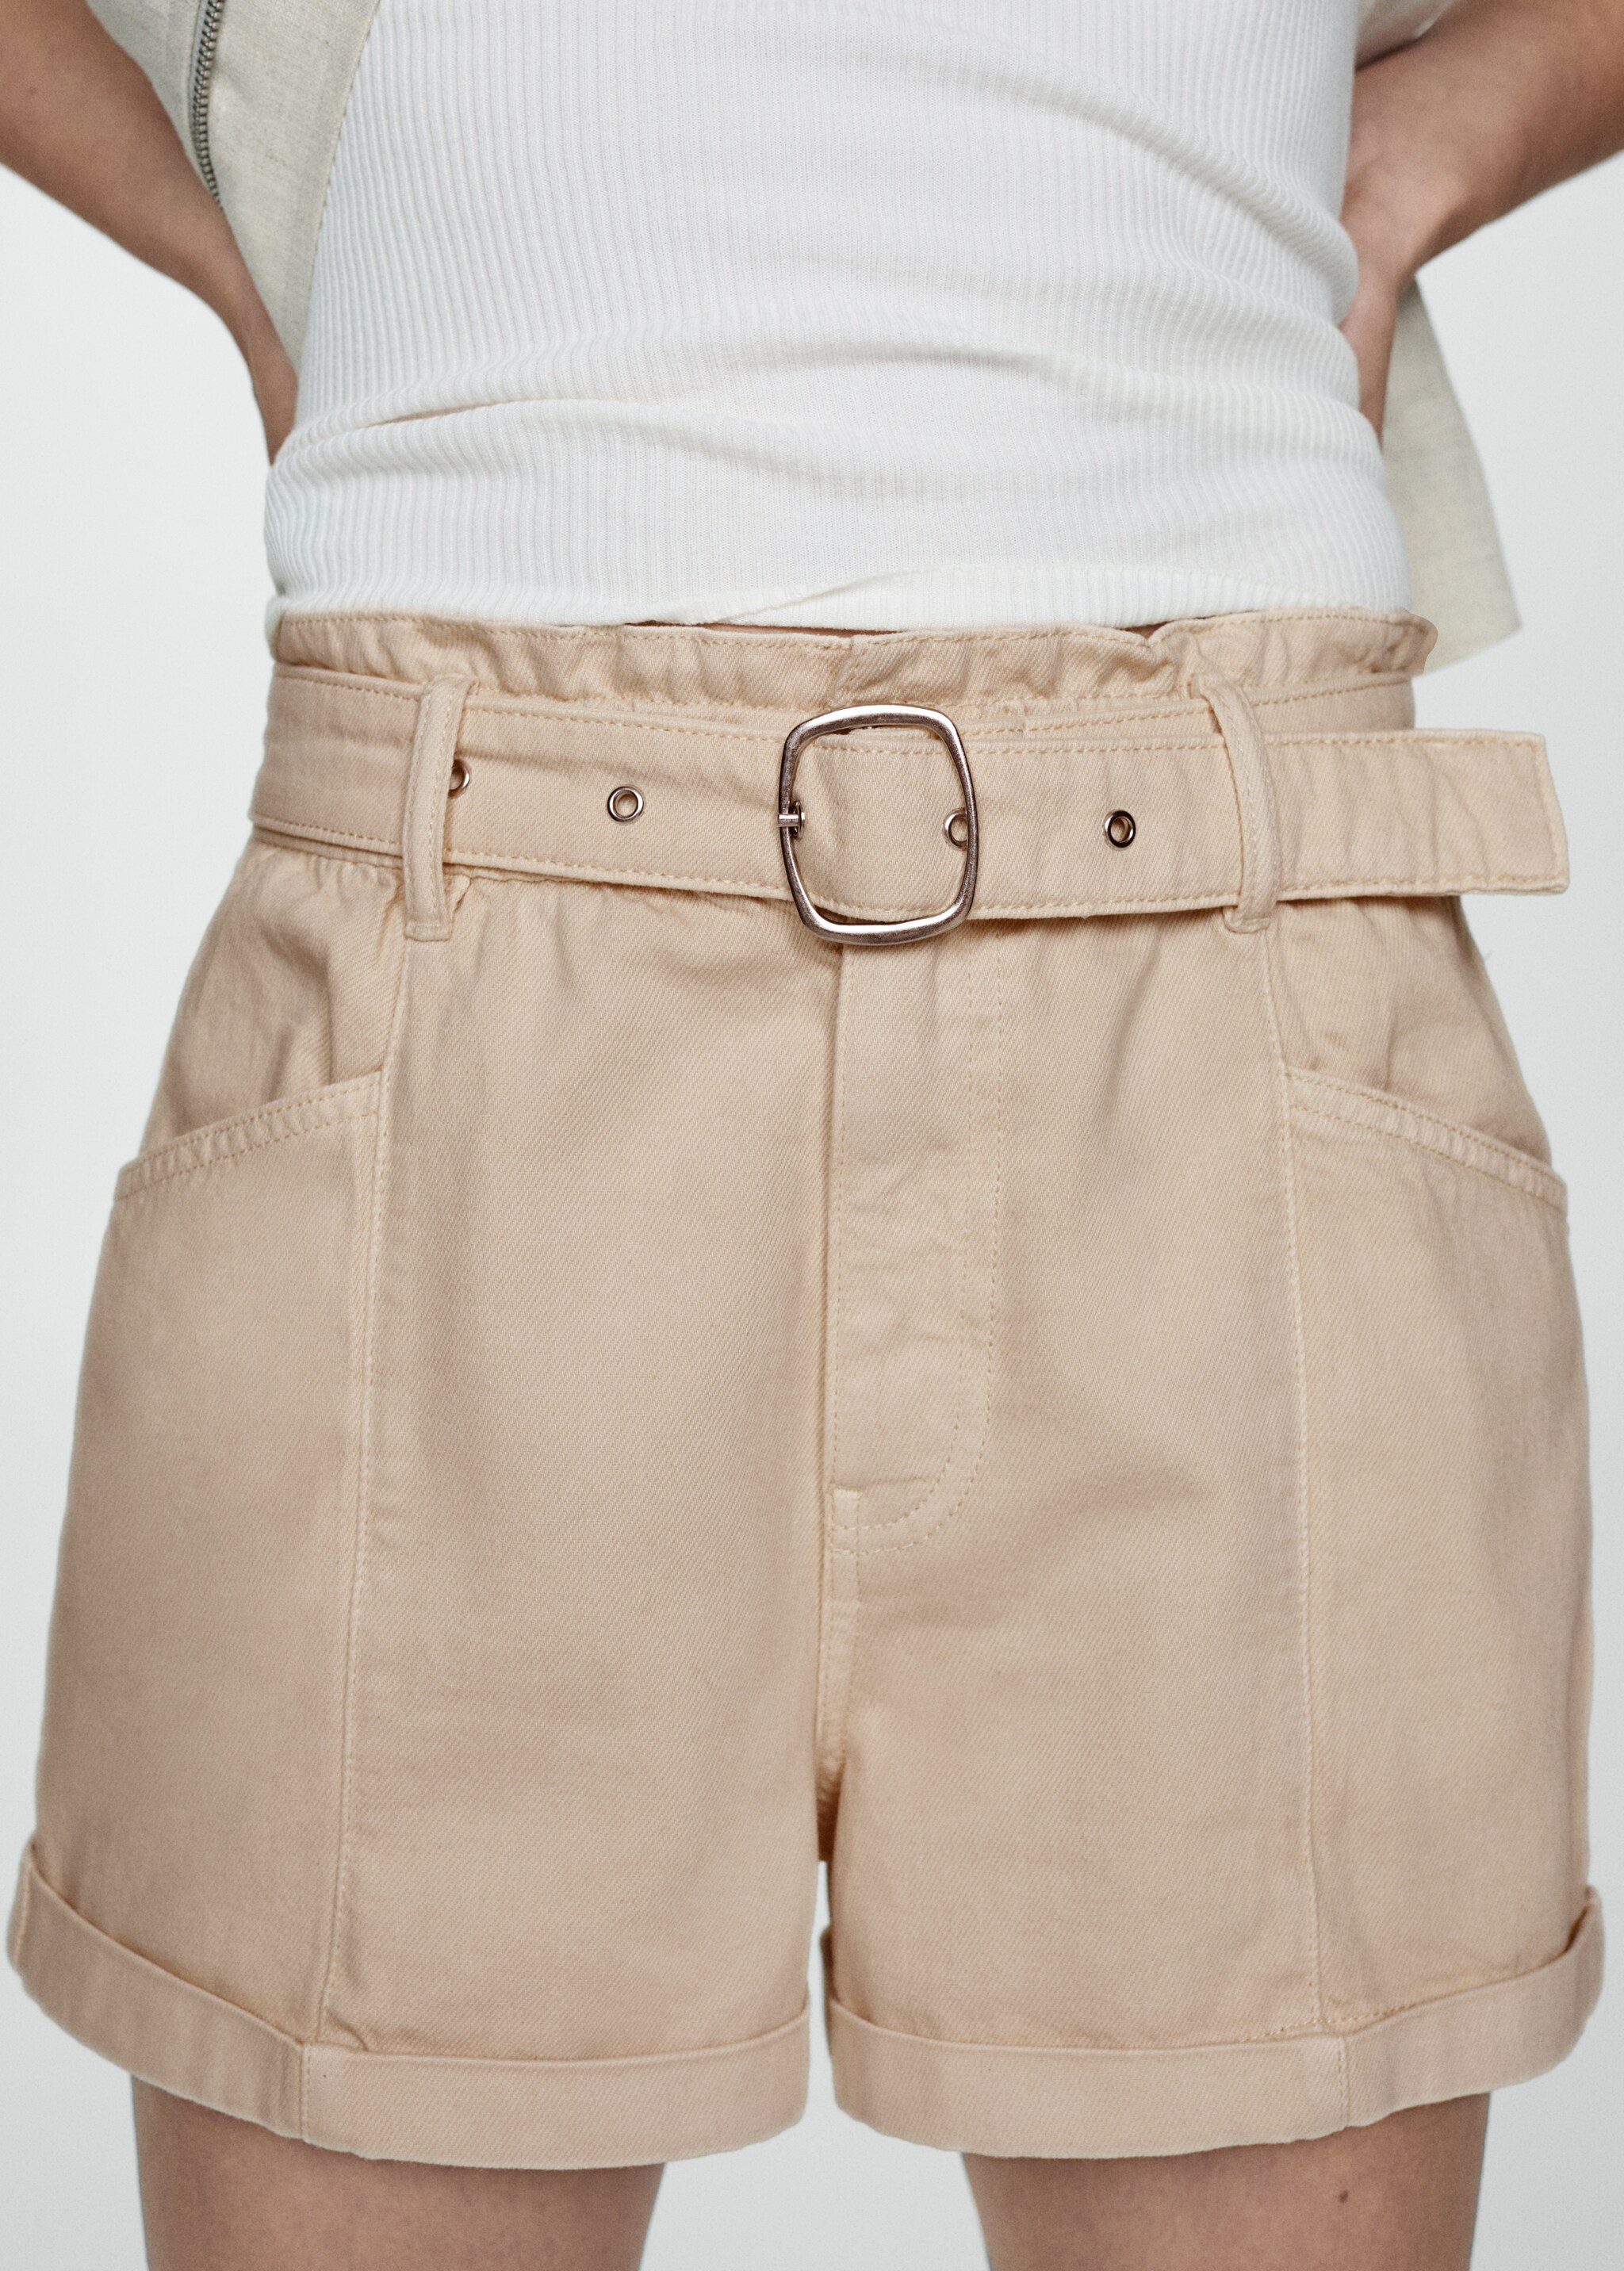 Denim shorts with belt - Details of the article 6